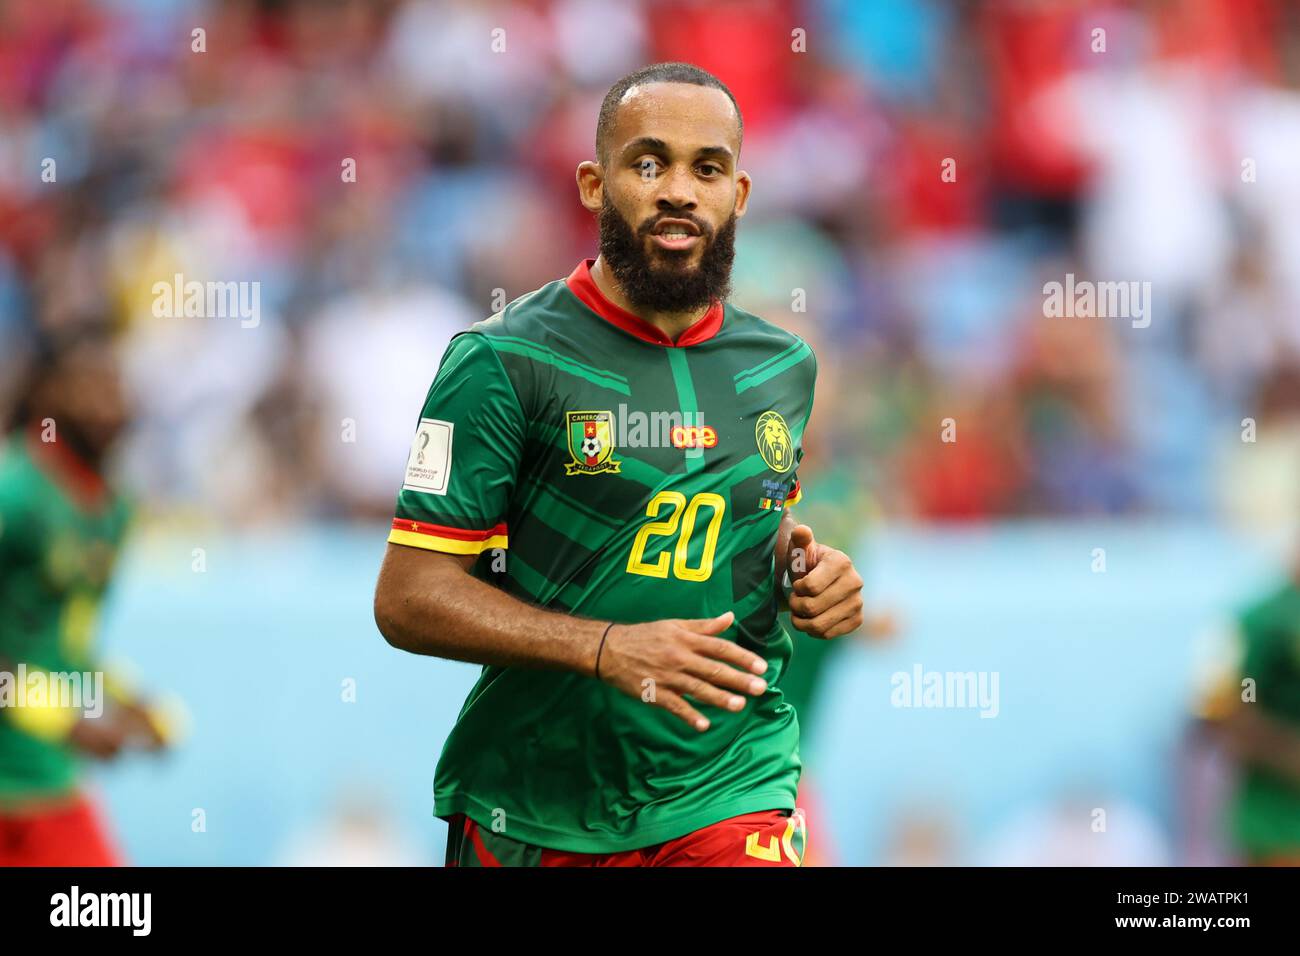 Qatar, Qatar. 28th Nov, 2022. Bryan Mbeumo of Cameroon seen in action during the FIFA World Cup Qatar 2022 match between Cameroon and Serbia at Al Janoub Stadium. Final score: Cameroon 3:3 Serbia. (Photo by Grzegorz Wajda/SOPA Images/Sipa USA) Credit: Sipa USA/Alamy Live News Stock Photo